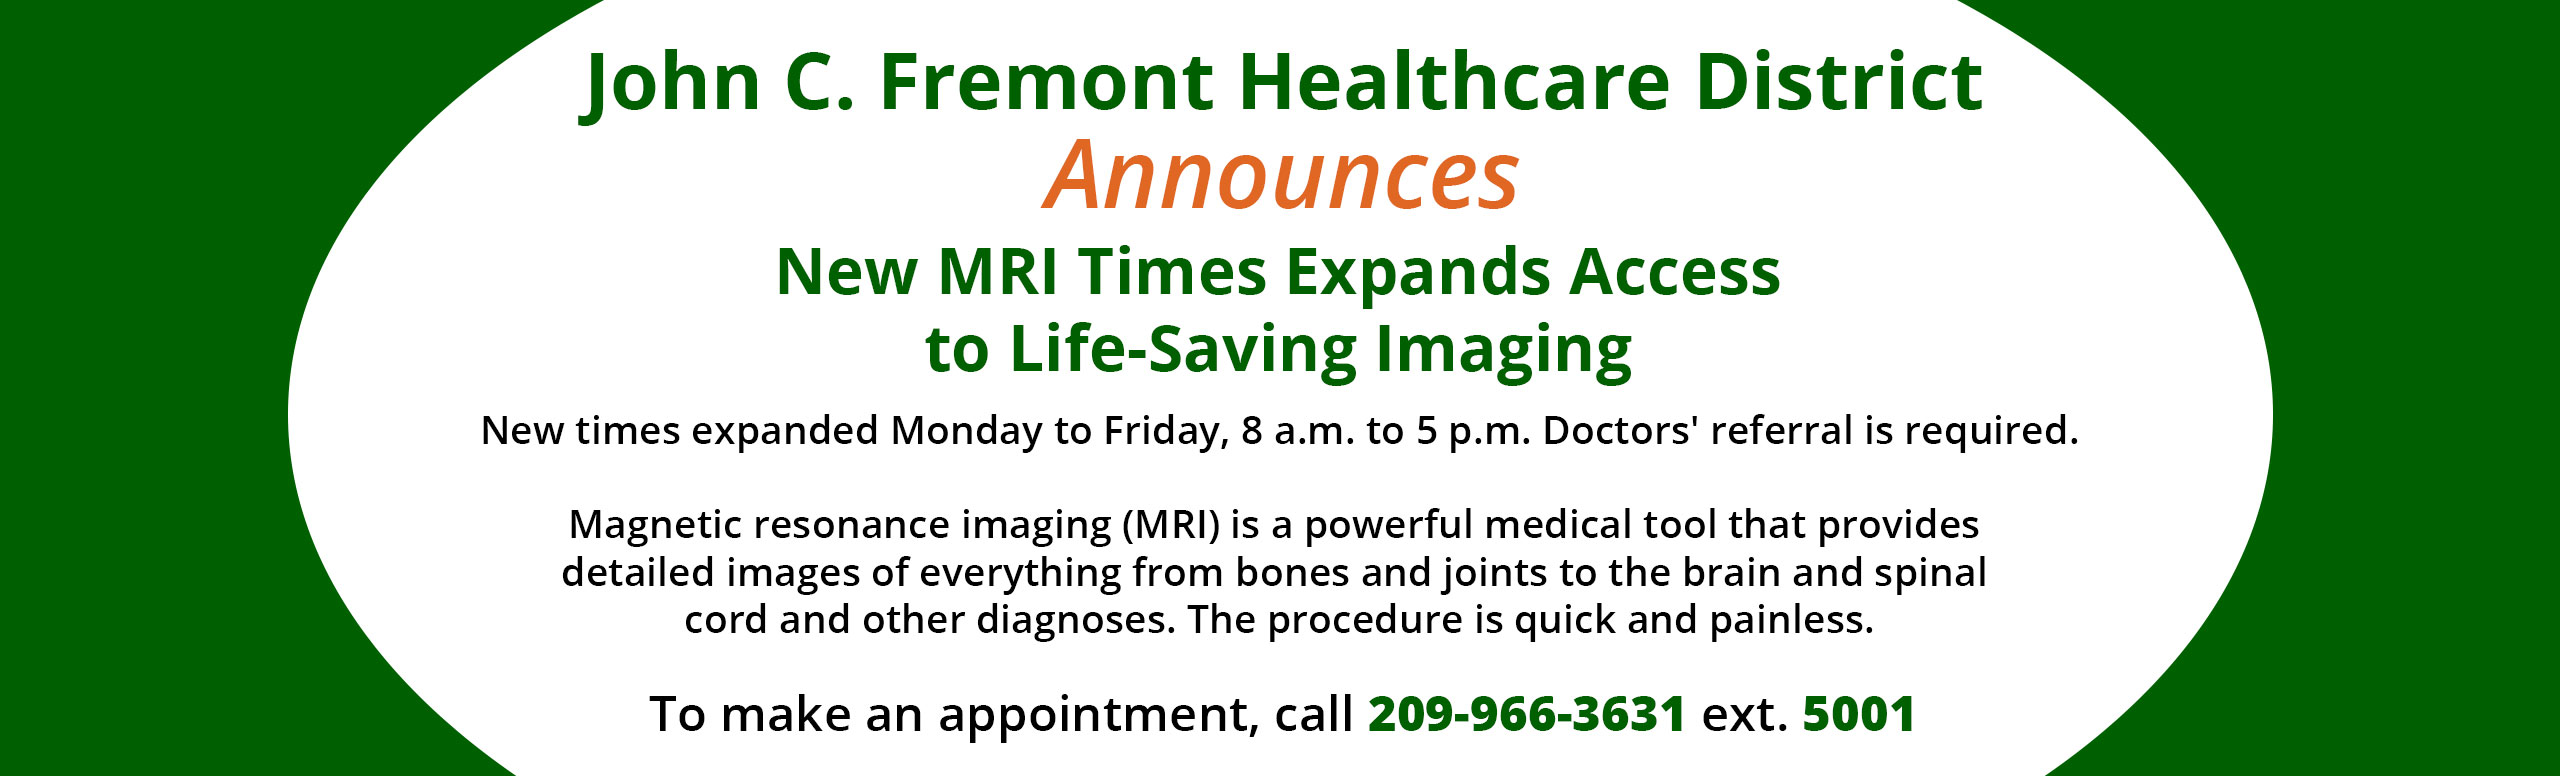 Banner that says:

John C. Fremont Healthcare District Announces New MRI Times Expands Access to Life-Saving Imaging
New times expanded Monday to Friday, 8 a.m. to 5 p.m. Doctor's referral is required.

Magnetic resonance imaging (MRI) is a powerful medical tool that provides detailed images of everything from bones and joints to the brain and spinal cord and other diagnoses. The procedure is quick and painless. 

To make an appointment, call 209-966-3631 ext. 5001